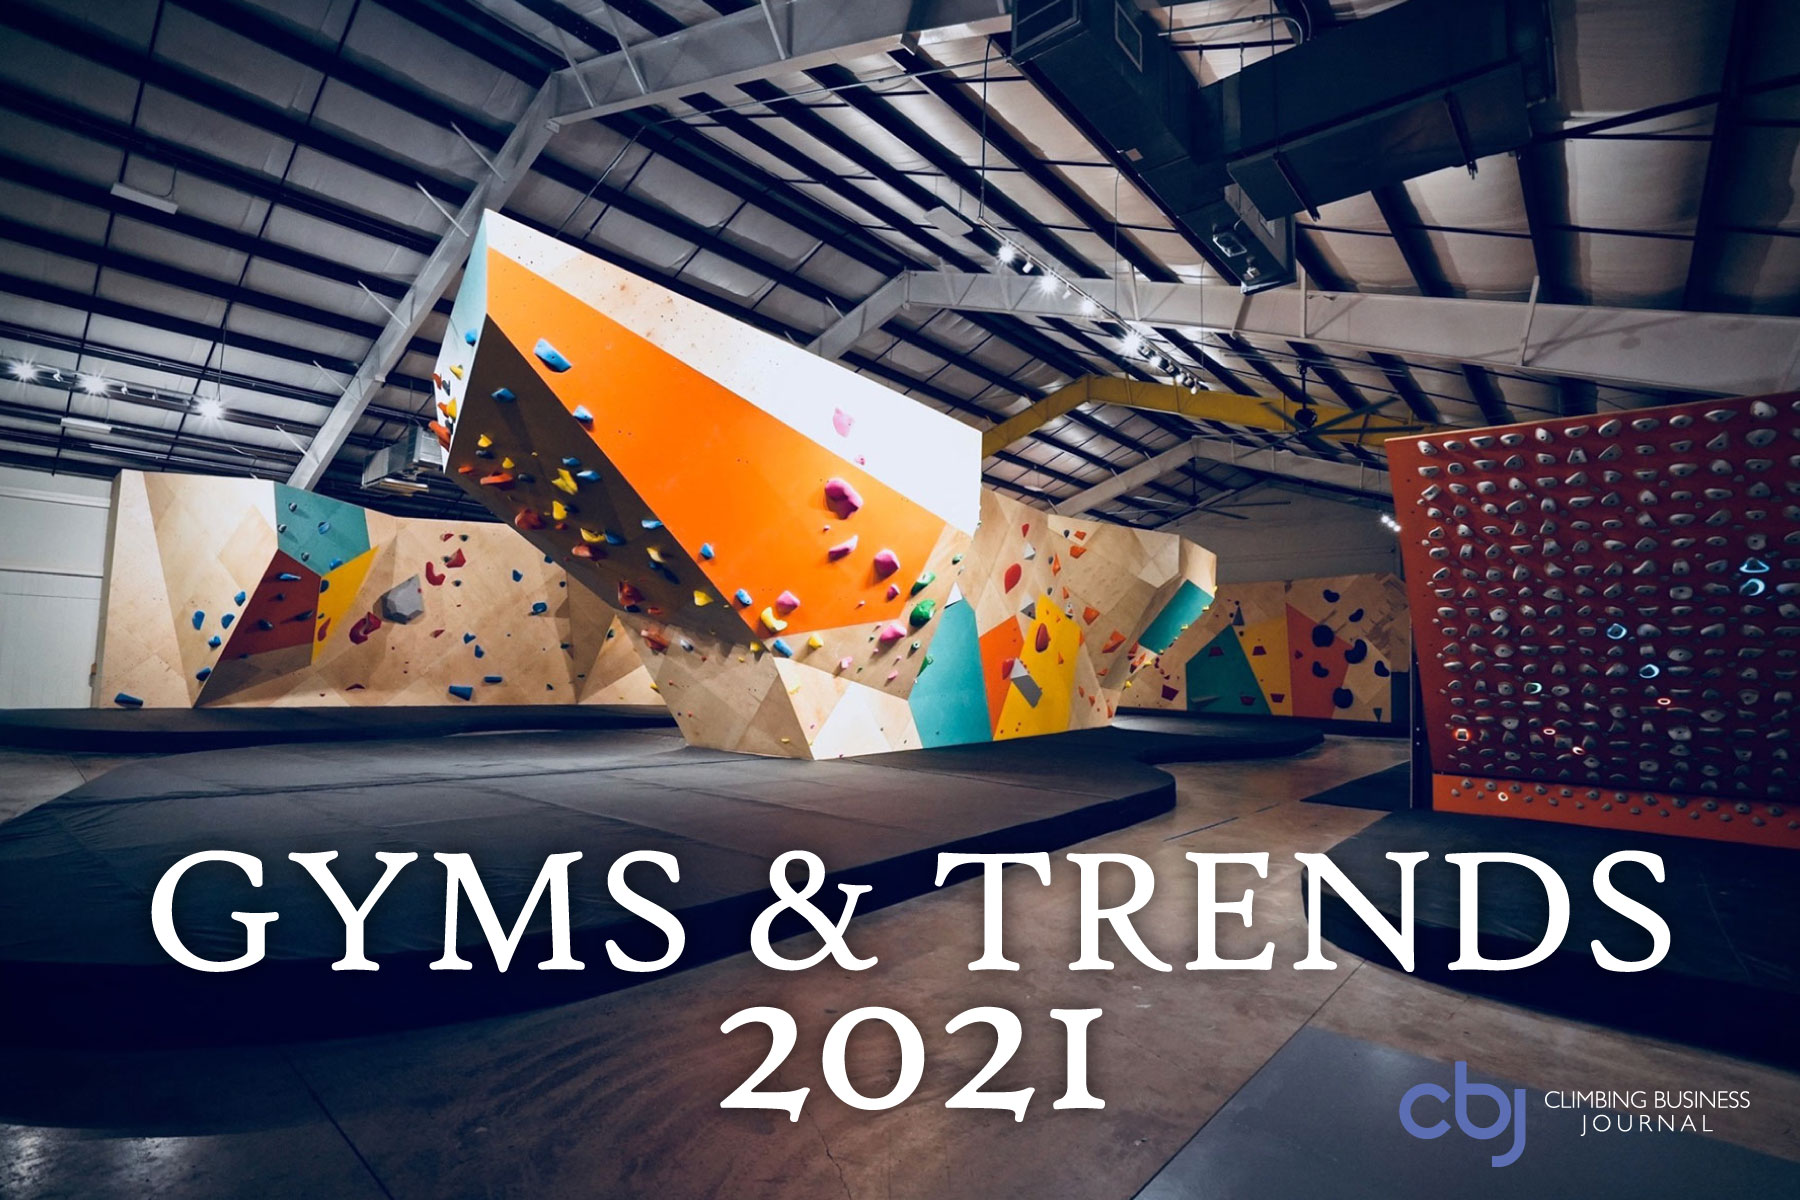 Gyms and Trends 2021 - Climbing Business Journal